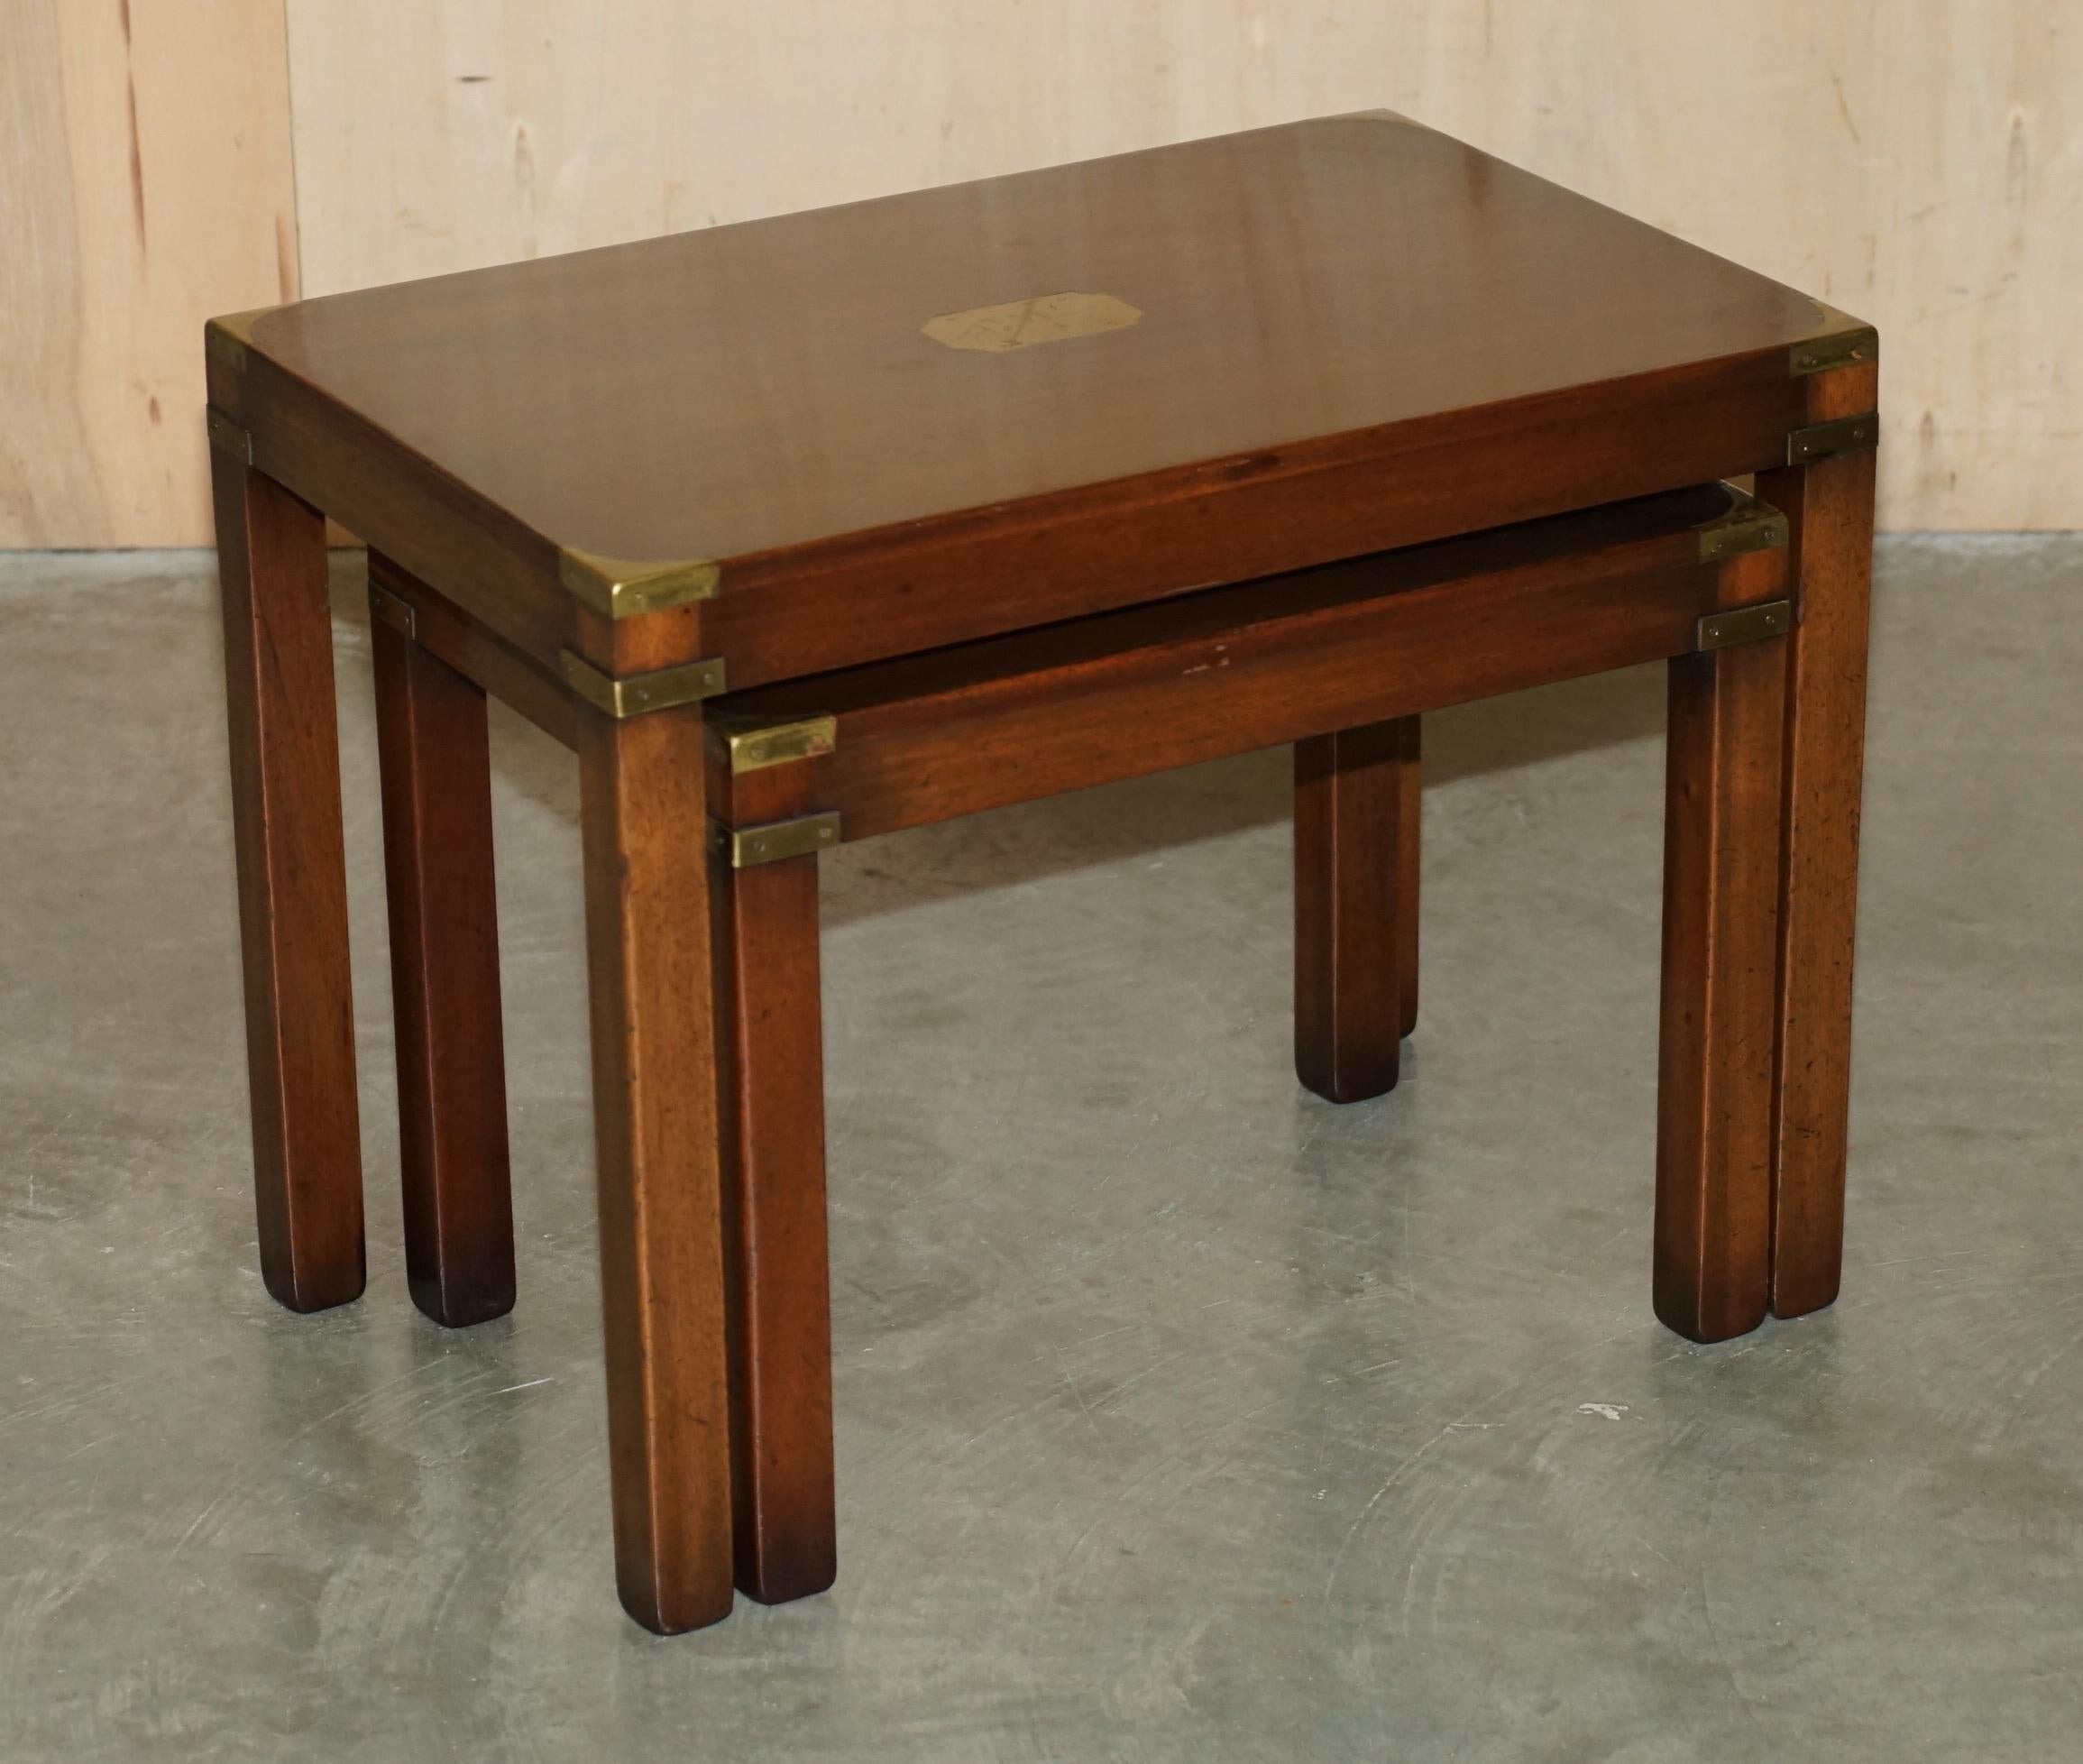 Campaign RESTORED HARRODS KENNEDY COFFEE & SiDE TABLE NEST OF TABLES MILITARY CAMPAIGN For Sale